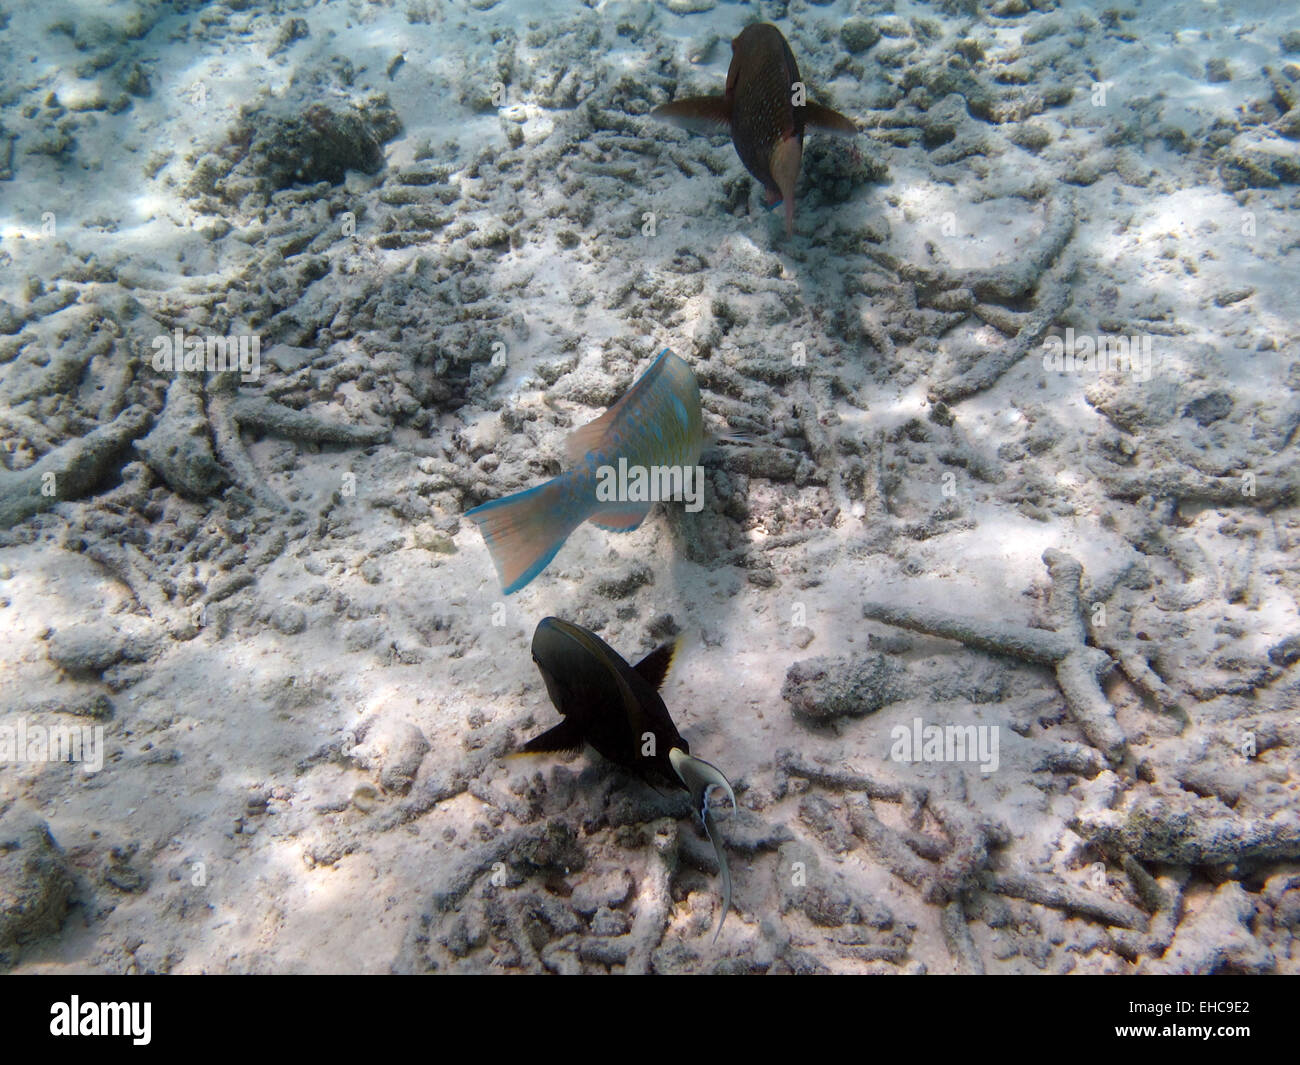 Eyestripe Surgeonfish, Bridled Parrotfish and a Philippine Damselfish on a coral reef in the Maldives Stock Photo